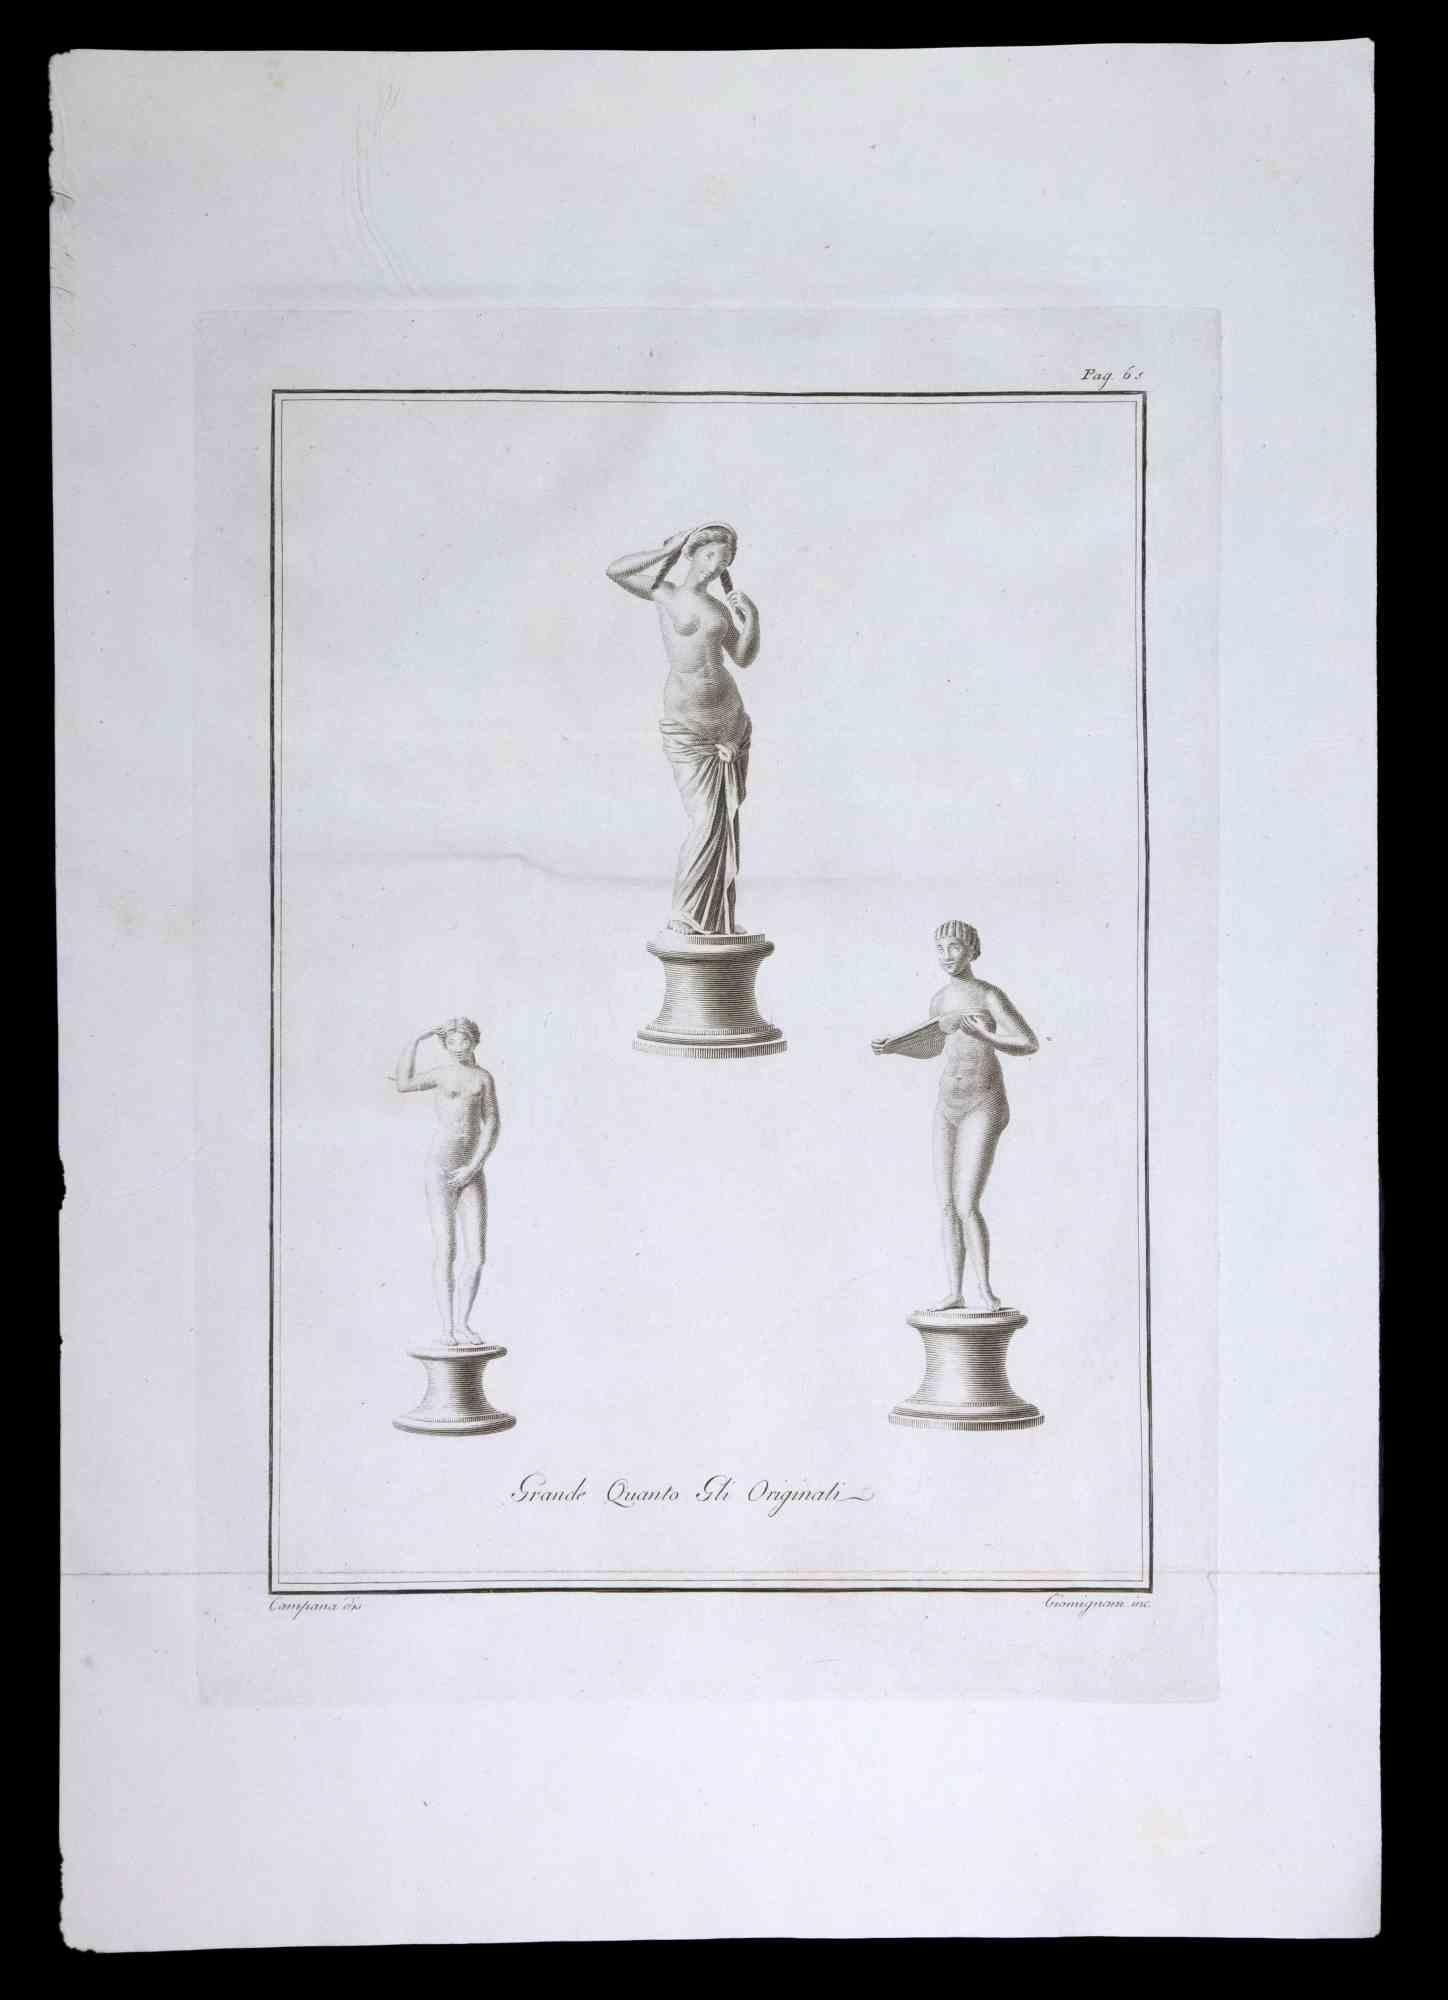 Ancient Roman statues, from the series "Antiquities of Herculaneum", is an original etching on paper realized by Ferdinando Campana in the 18th century.

Signed on the plate, on the lower left.

Good conditions.

The etching belongs to the print